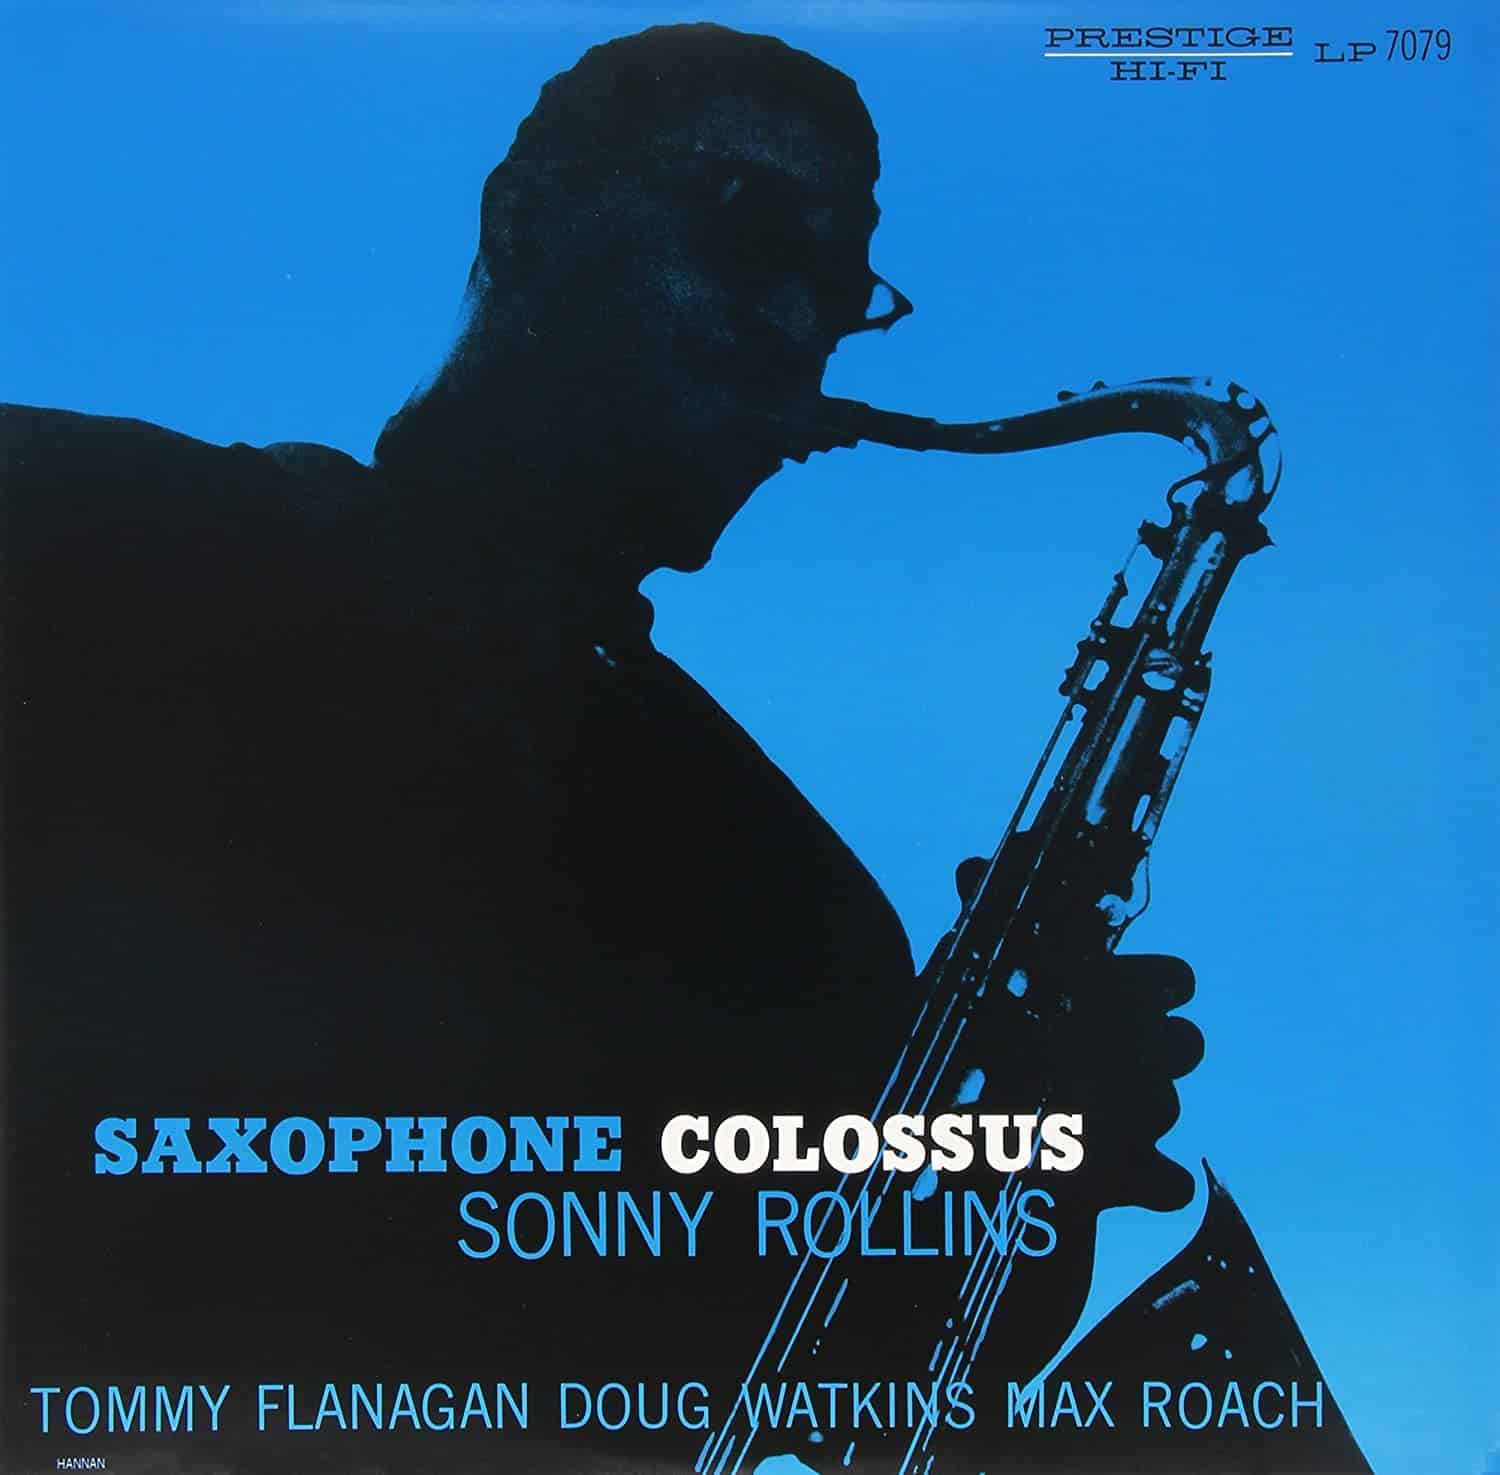 (Sonny Rollins – Saxophone Colossus (Analogue Productions